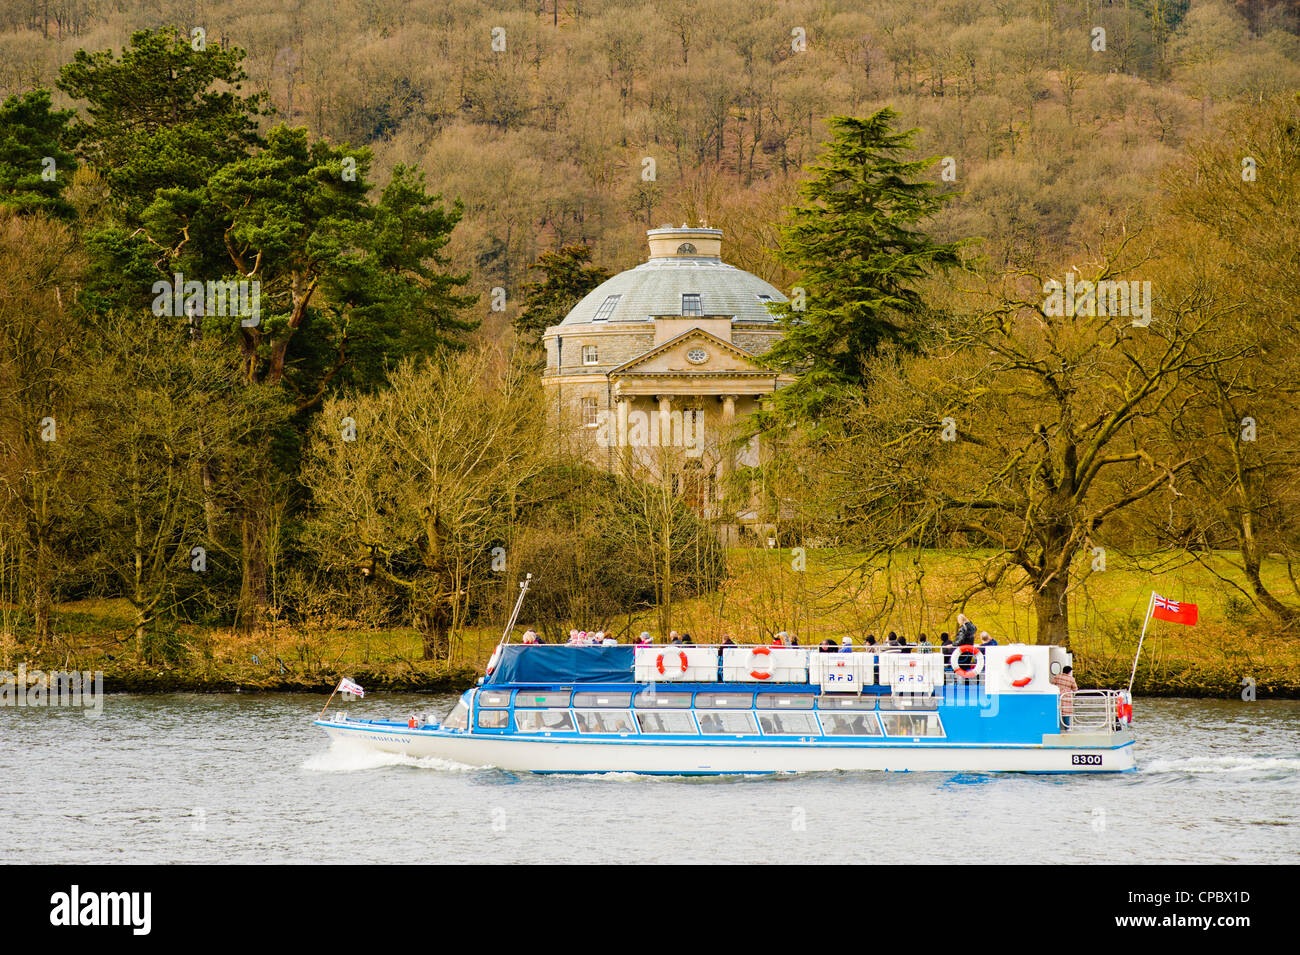 A launch passes the round house on Belle Isle in Windermere Lake District Stock Photo